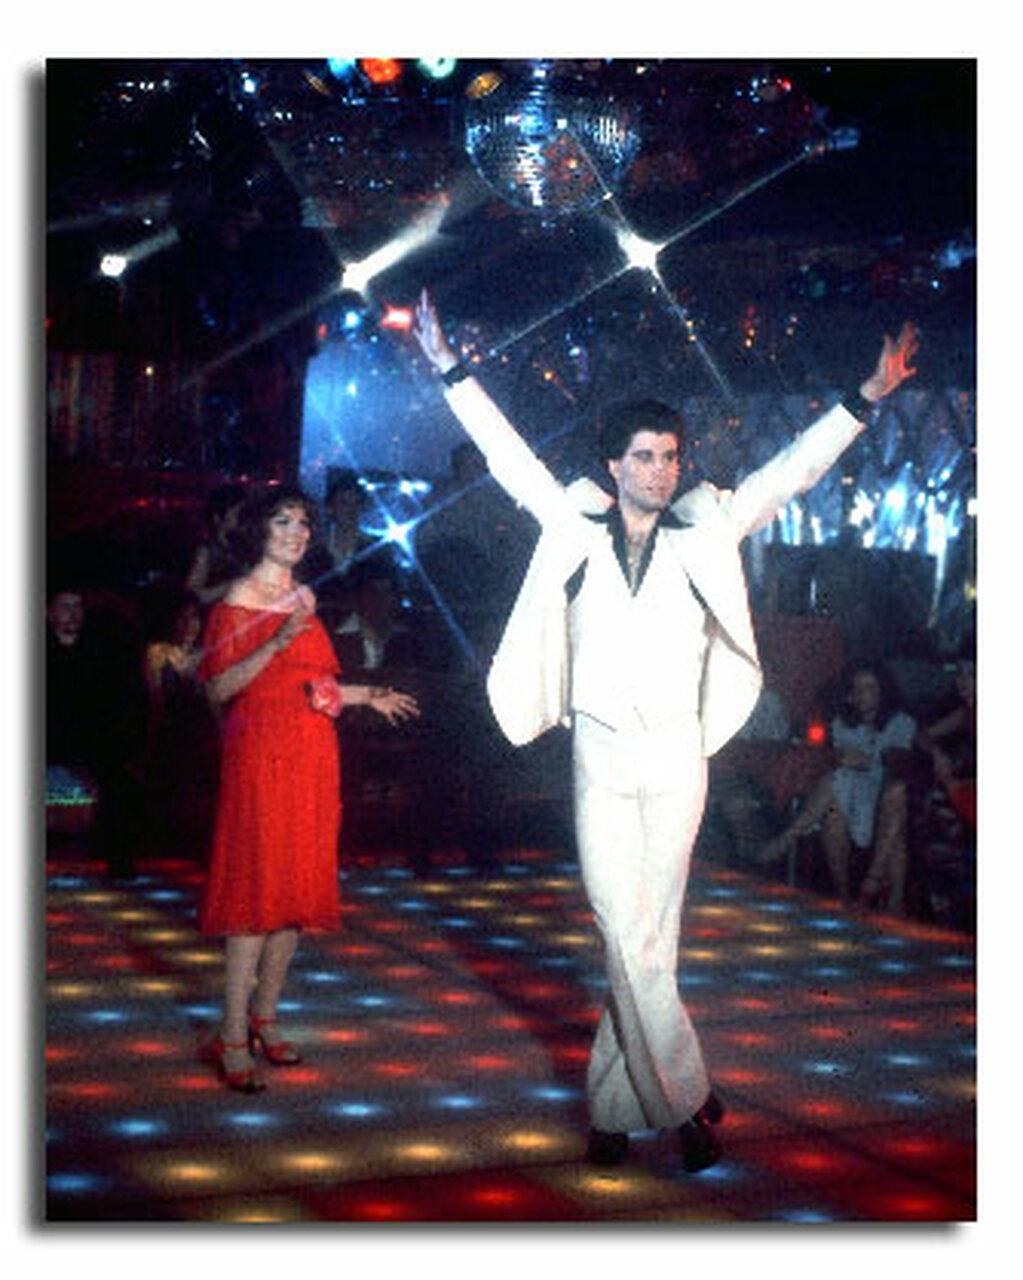 SS3588793) Movie picture of Saturday Night Fever buy celebrity photo and posters at Starstills.com